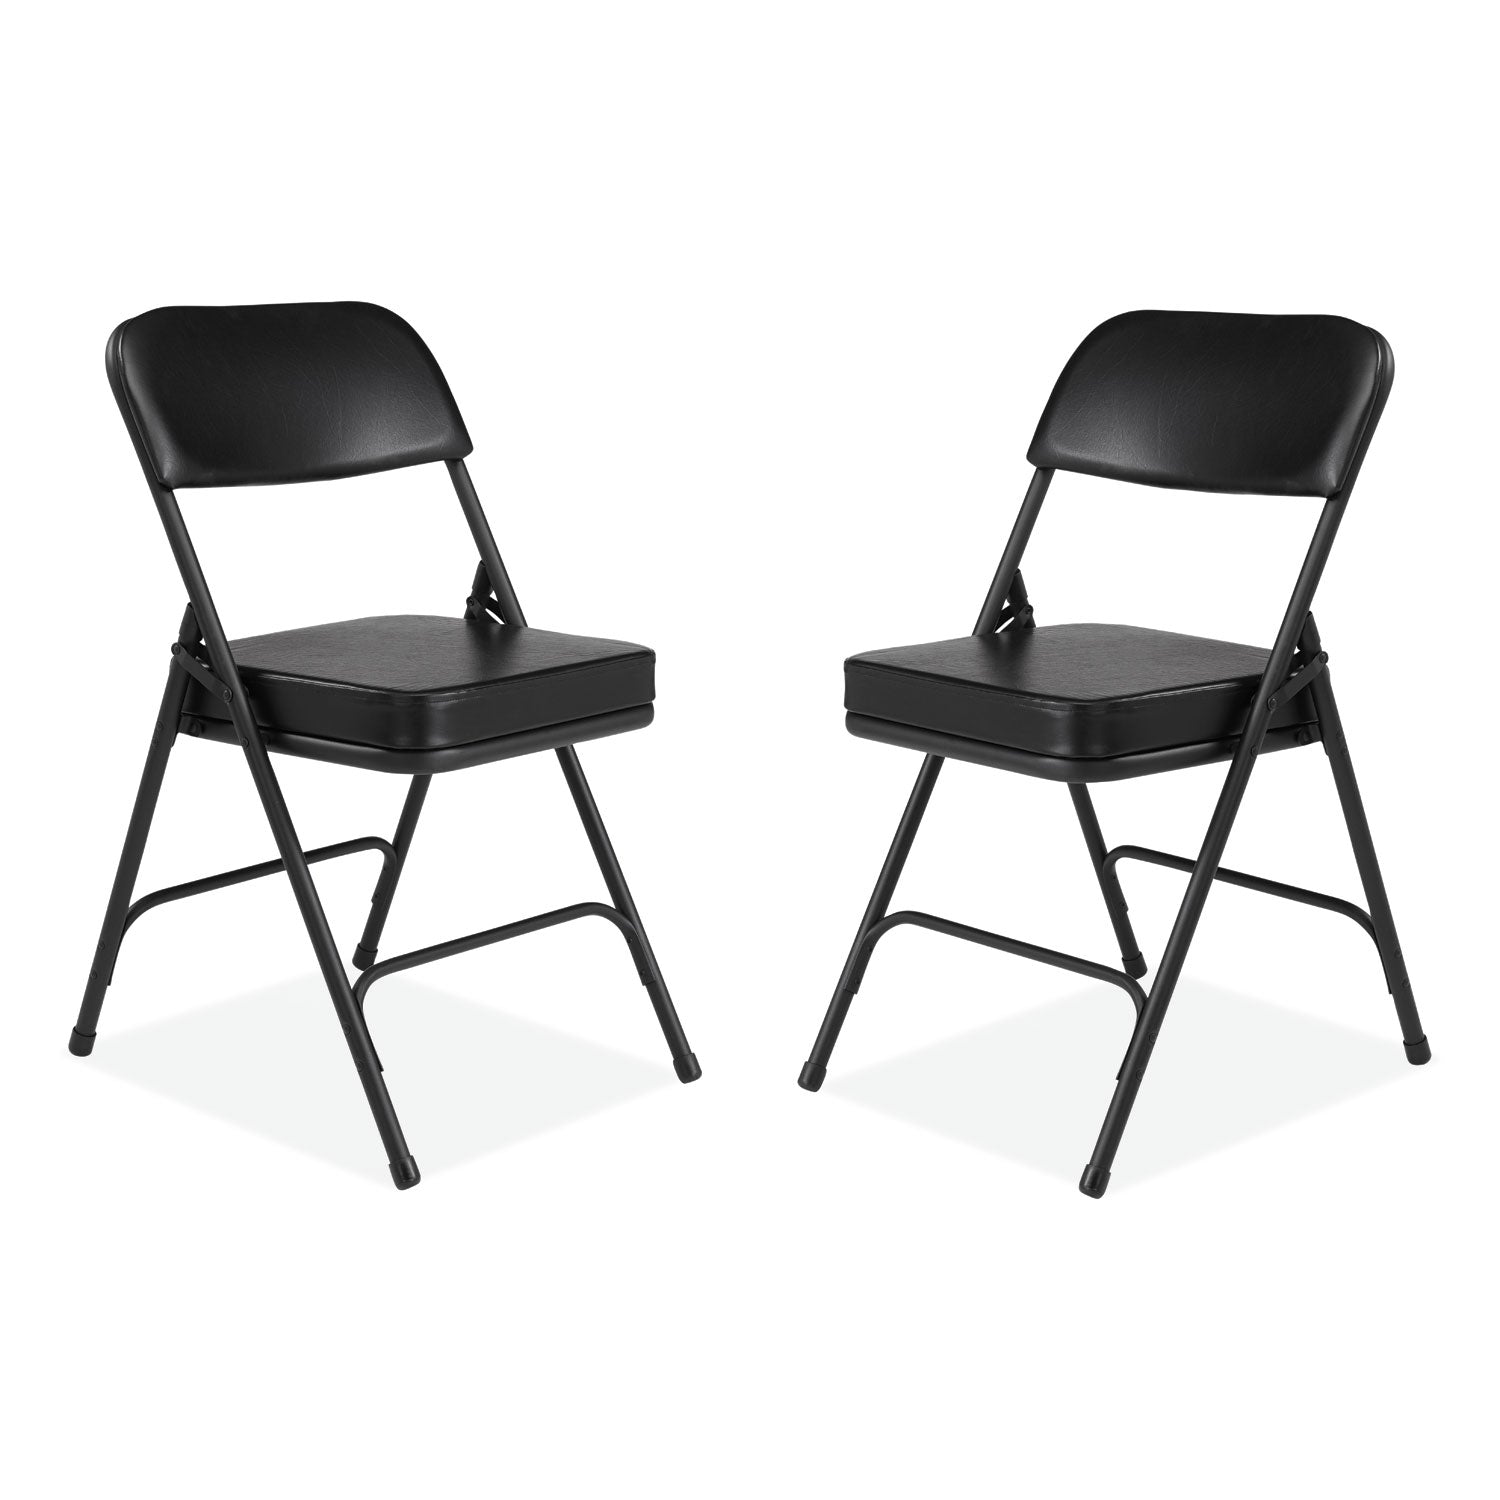 3200-series-2-vinyl-upholstered-double-hinge-folding-chair-supports-300lb-185-seat-ht-black-2-ctships-in-1-3-bus-days_nps3210 - 1